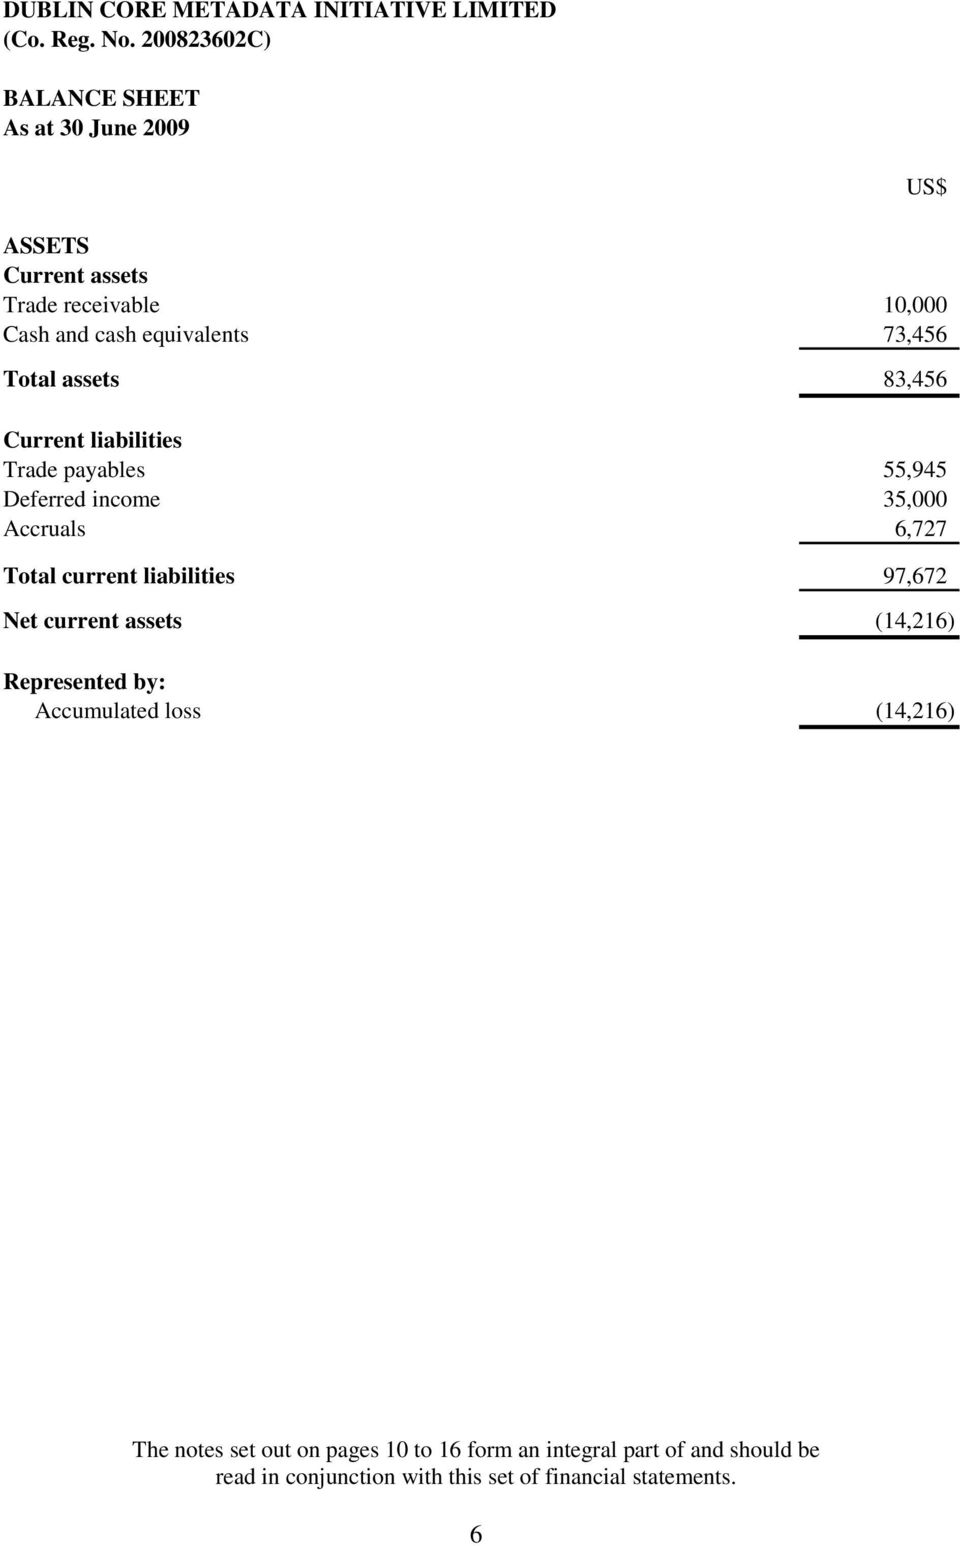 liabilities 97,672 US$ Net current assets (14,216) Represented by: Accumulated loss (14,216) The notes set out on